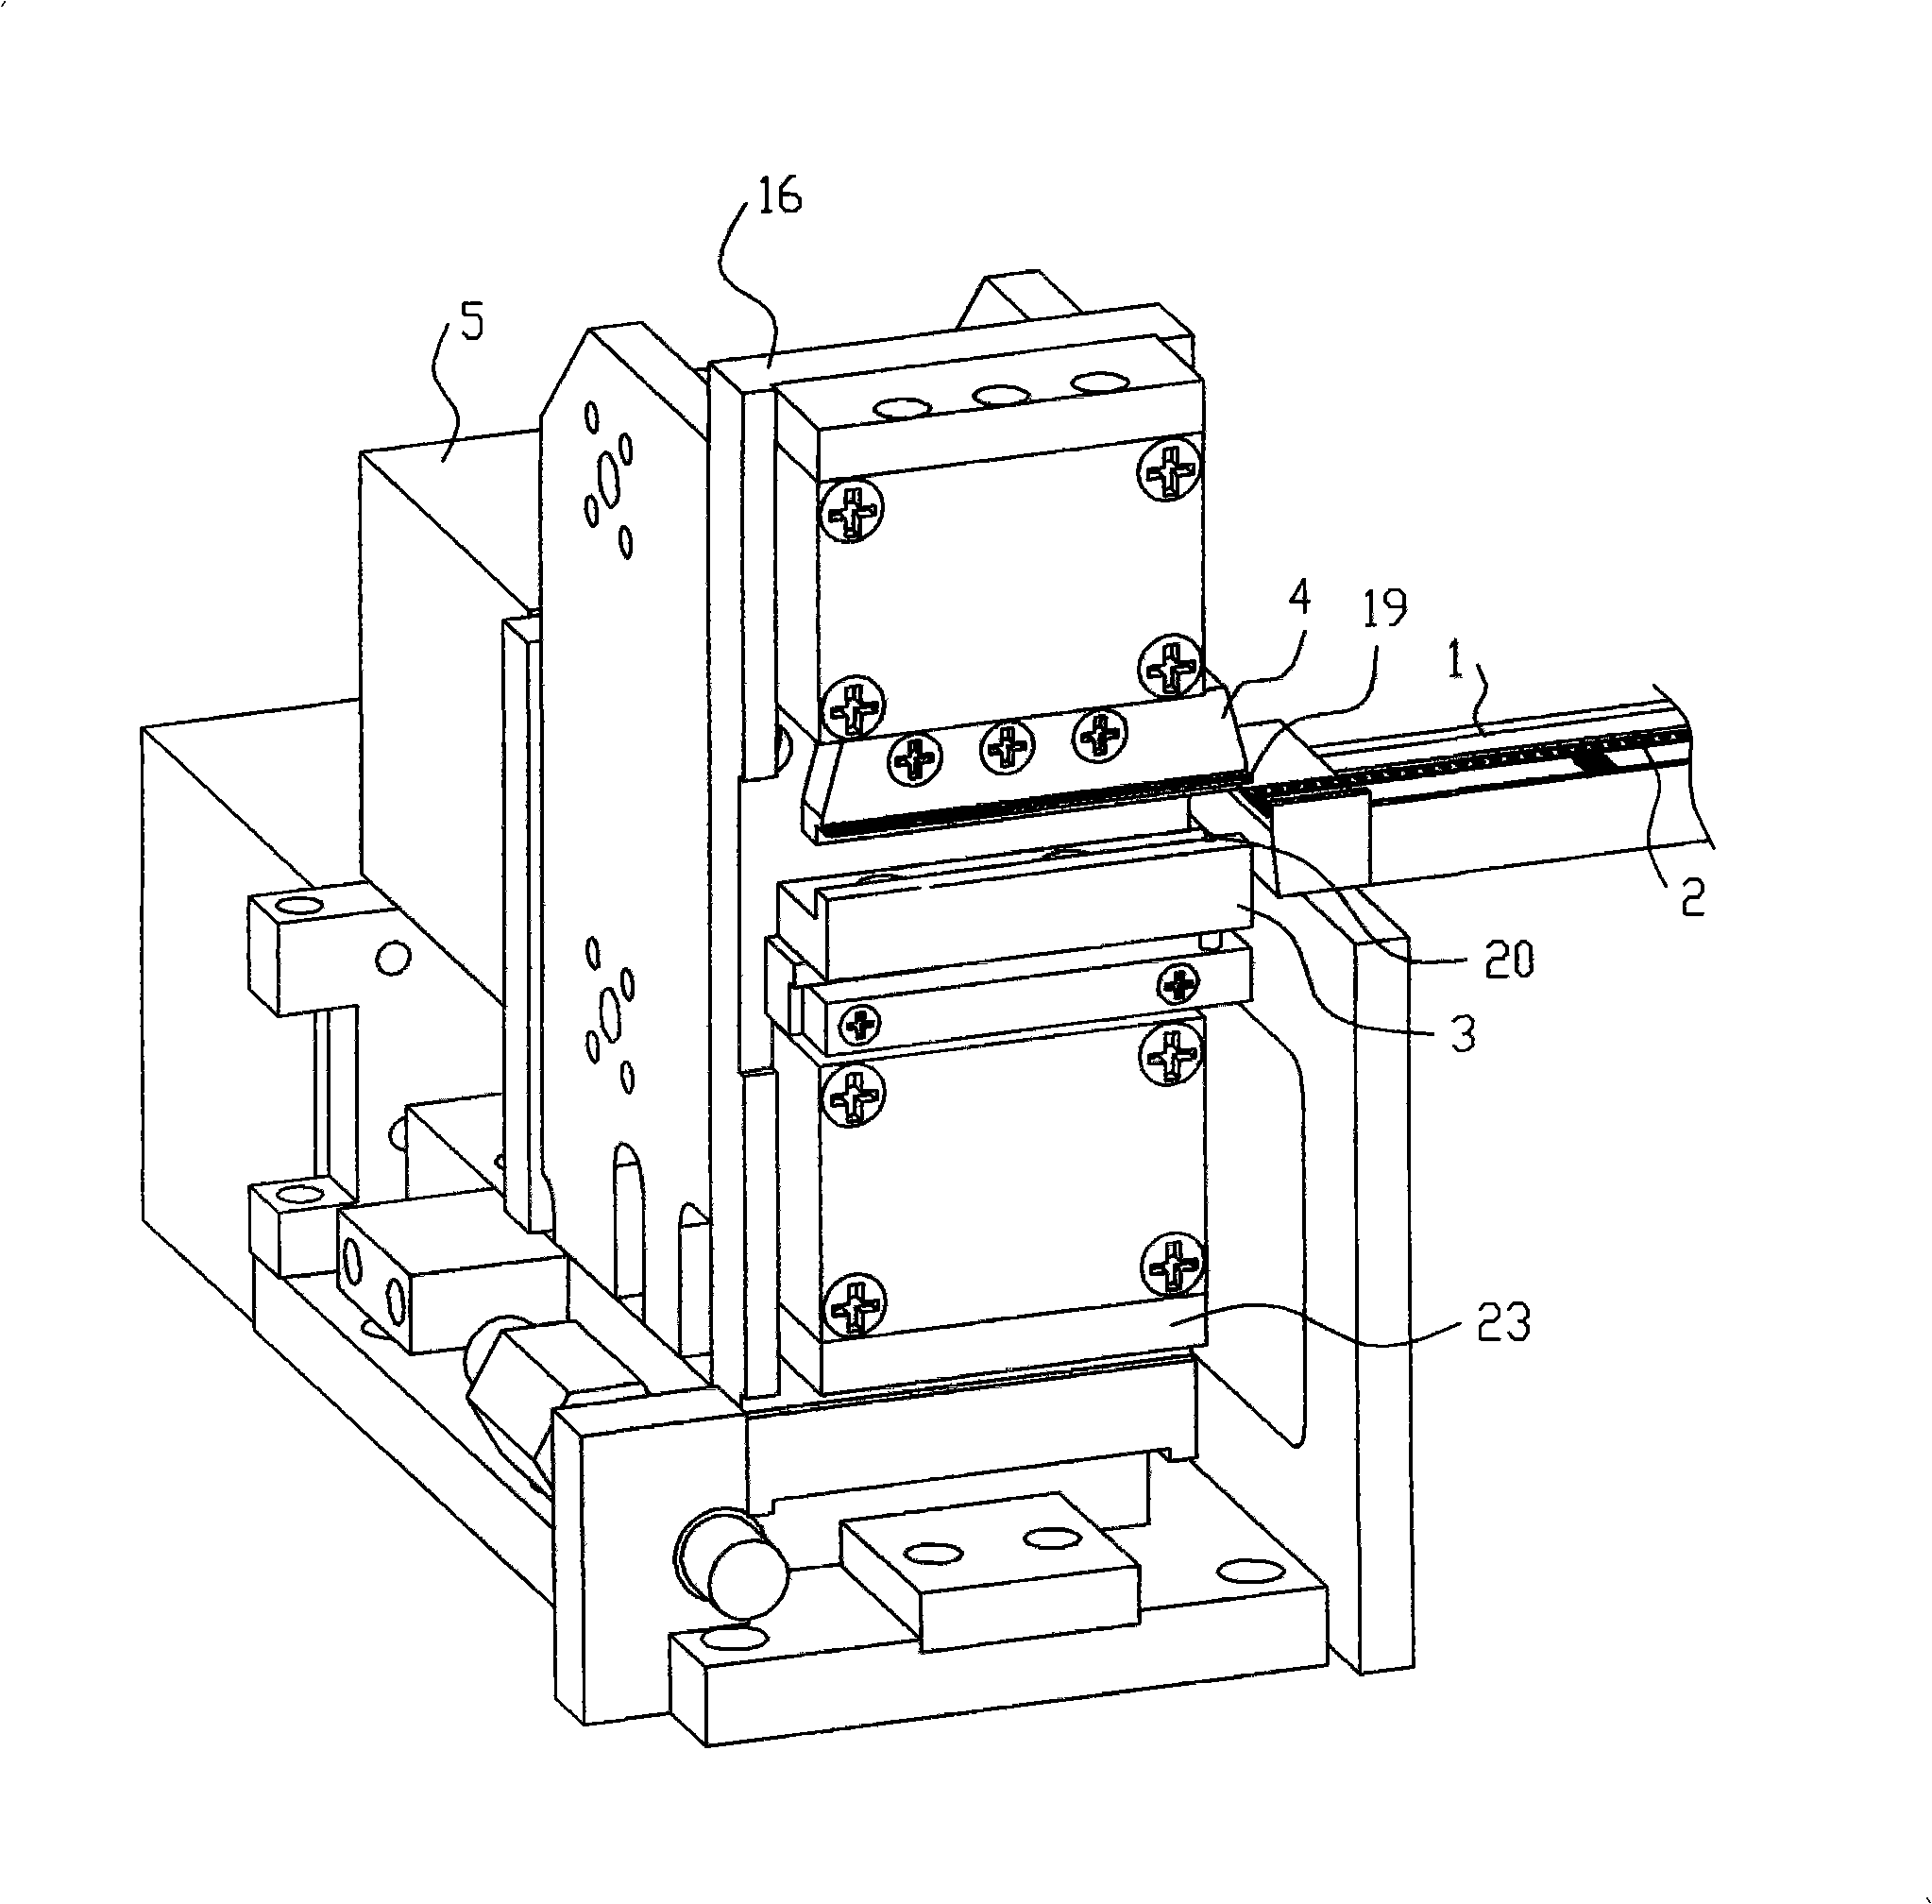 Mechanism for locating and guillotining terminal